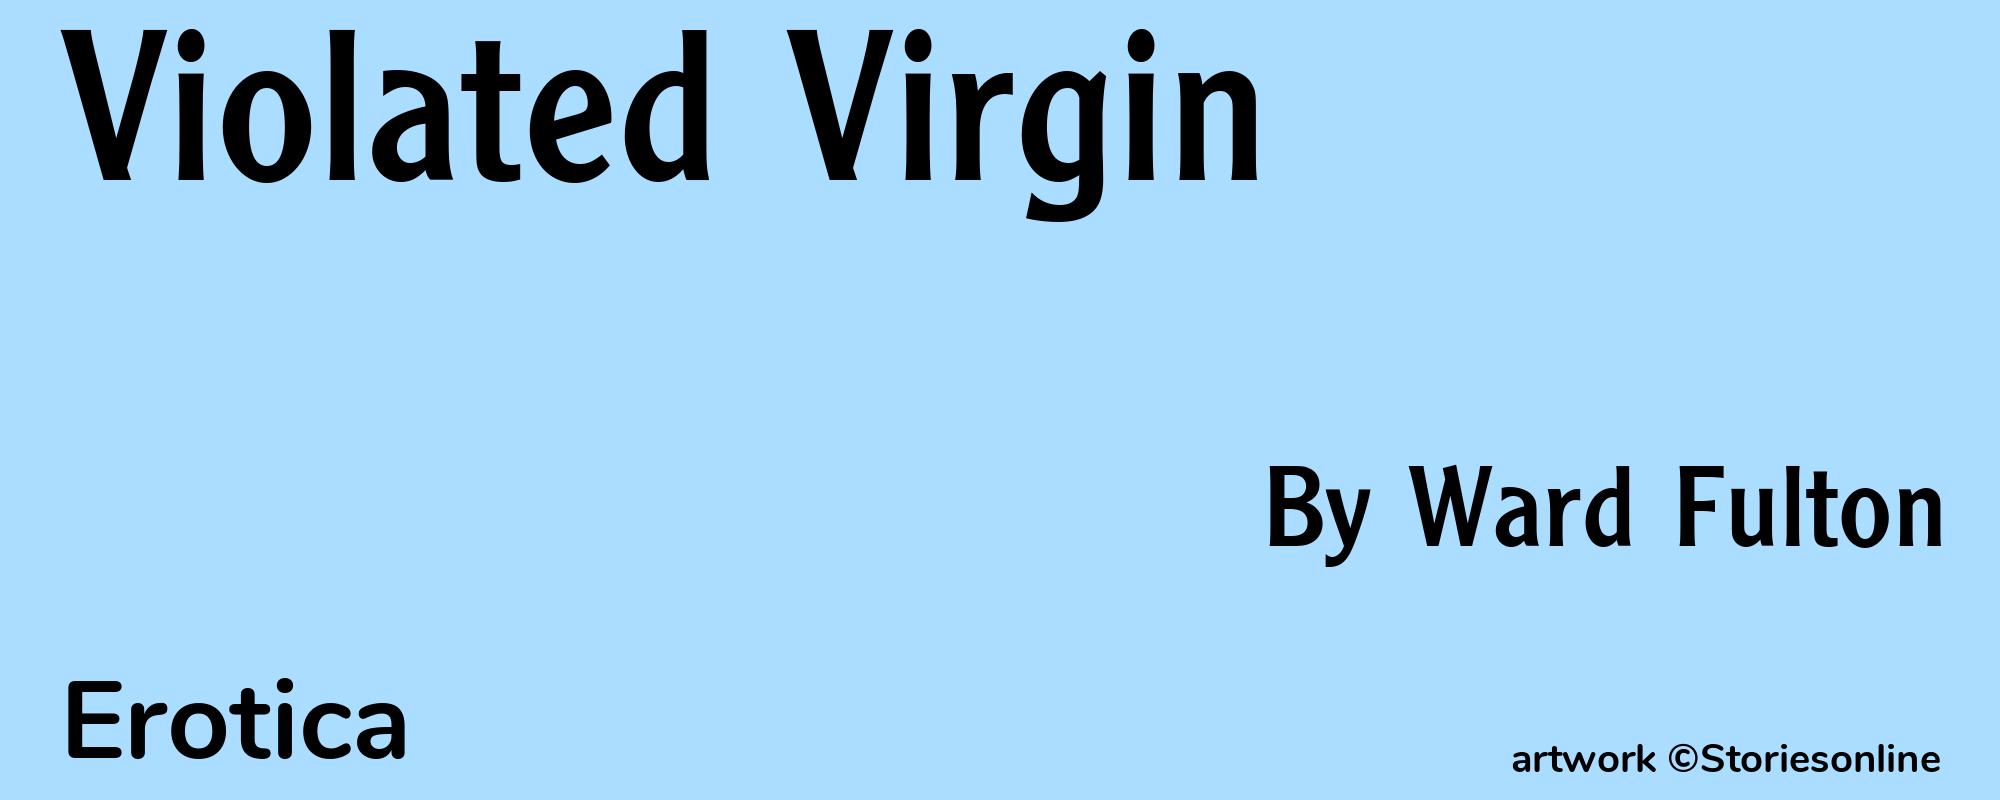 Violated Virgin - Cover